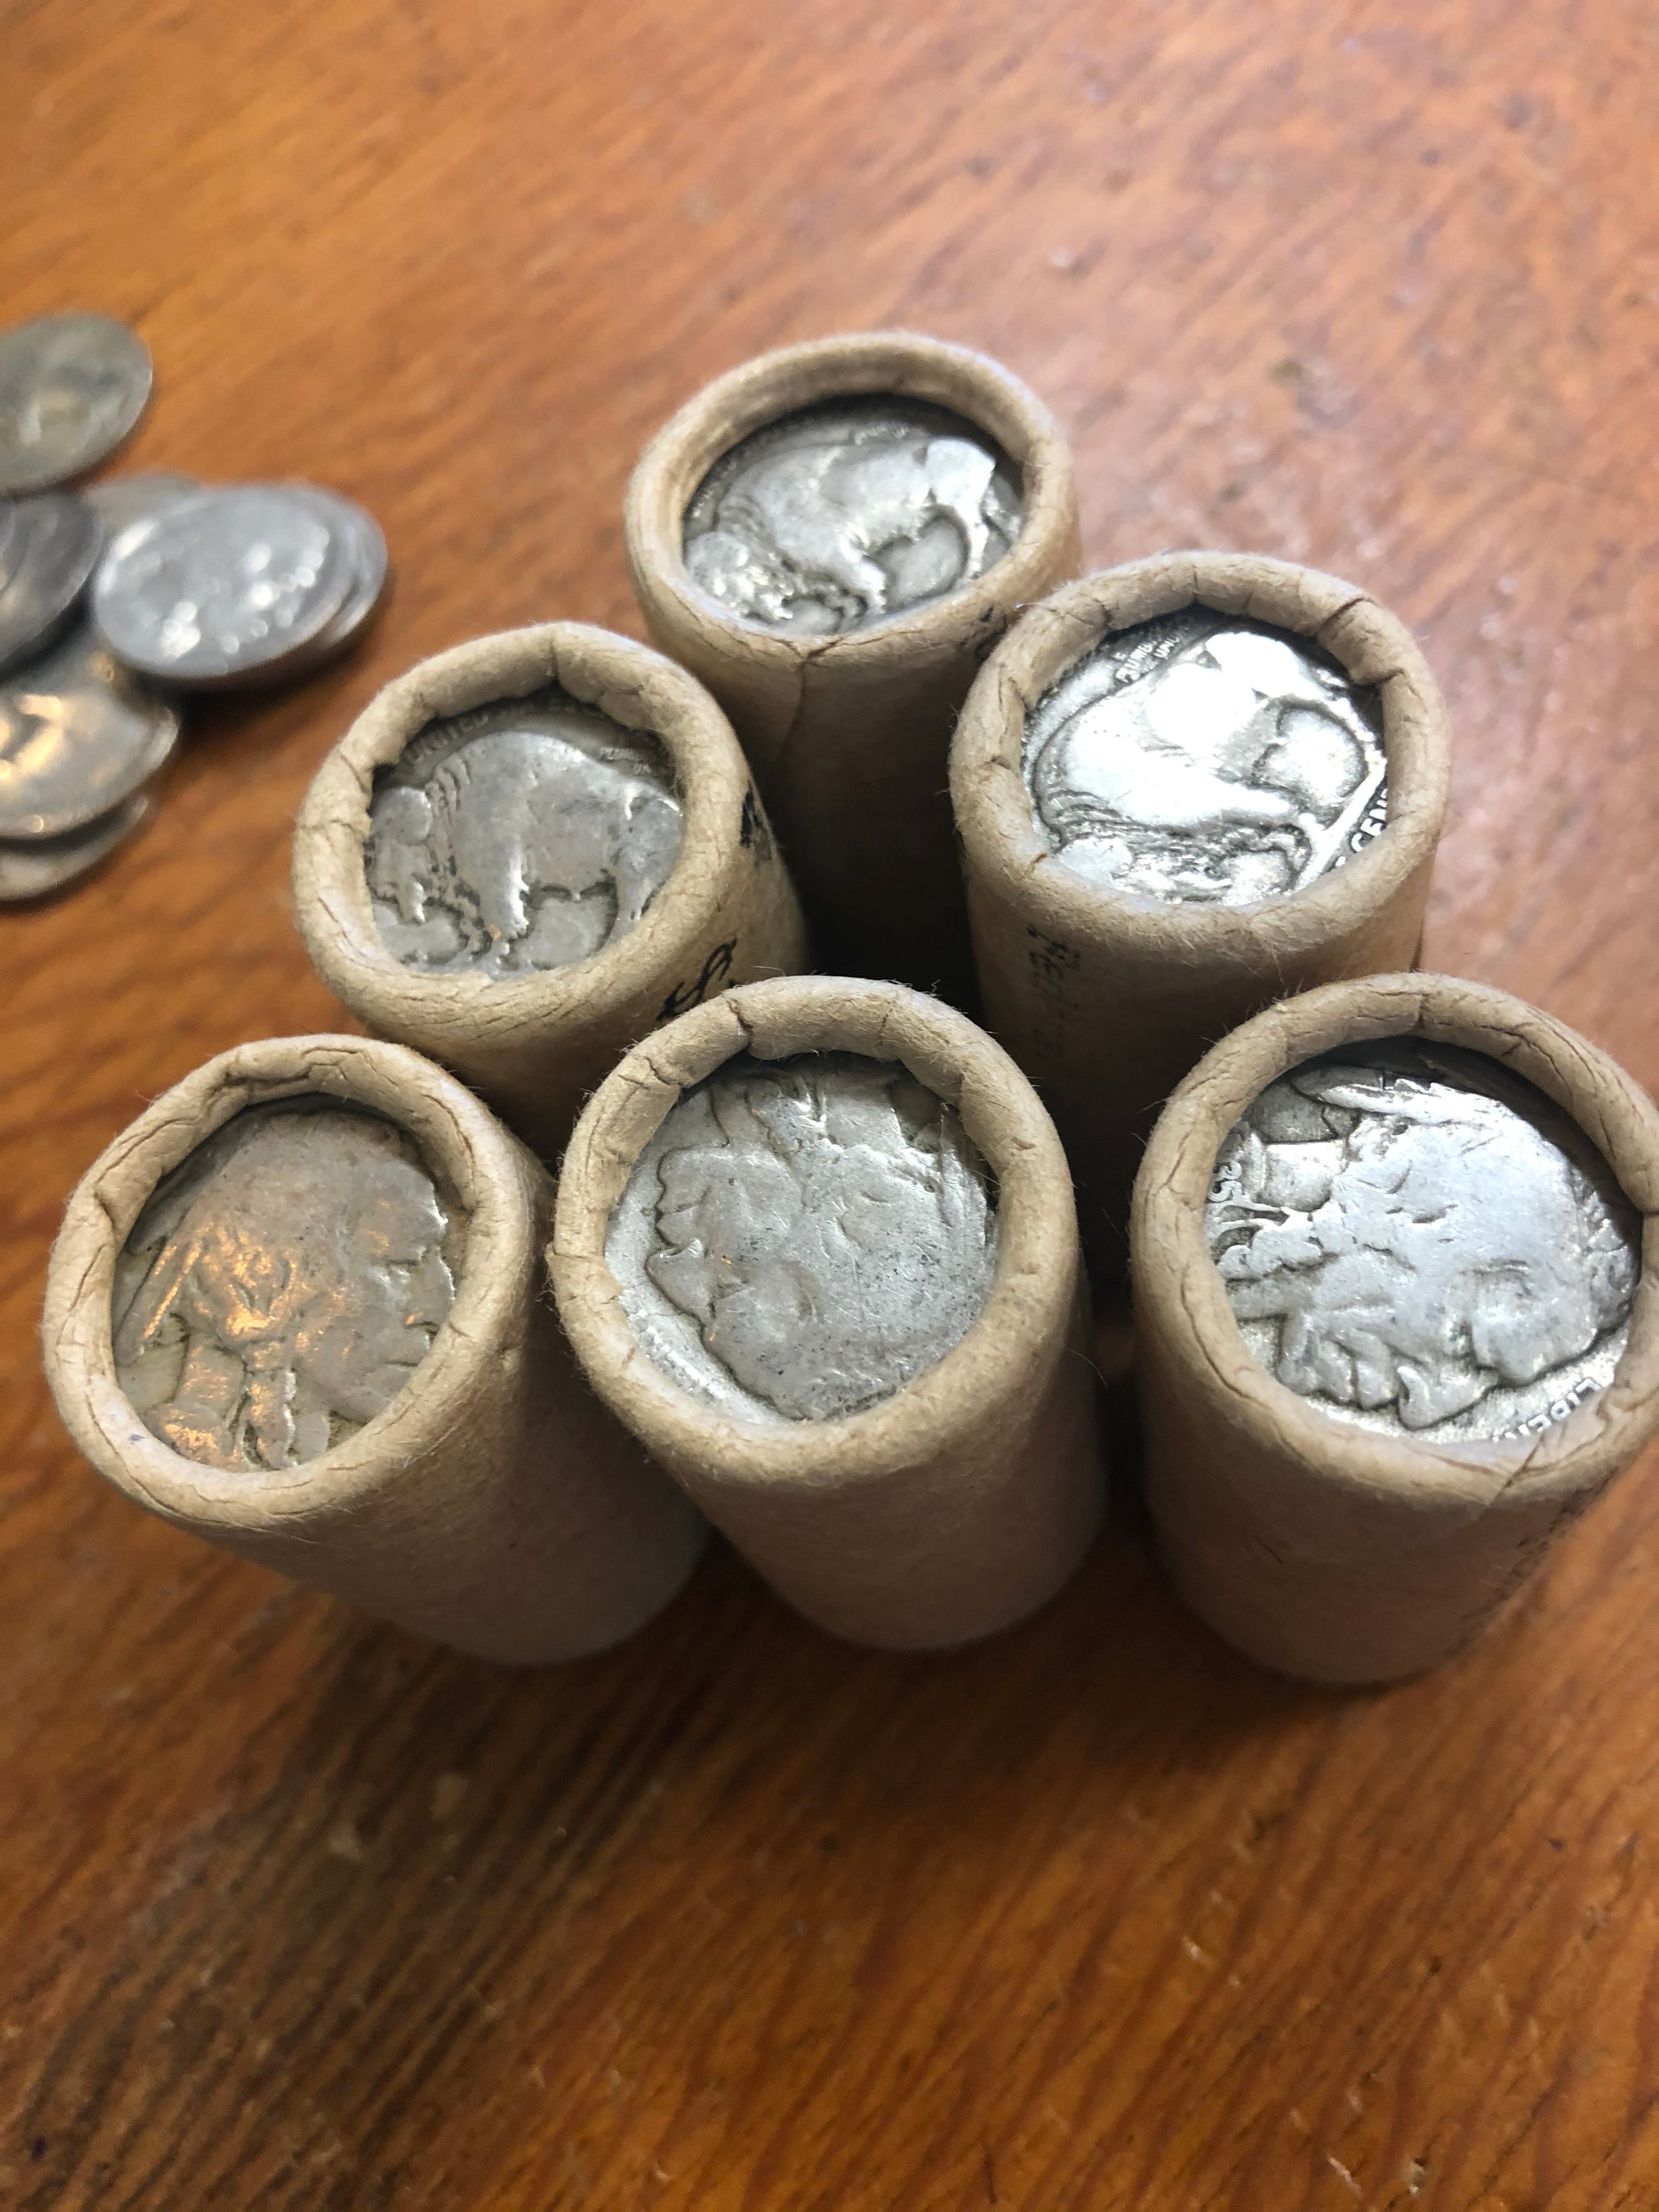 Buffalo nickel 1/2 rolls from Chicago Federal Reserve - Sealed rolls - Old and wonderful